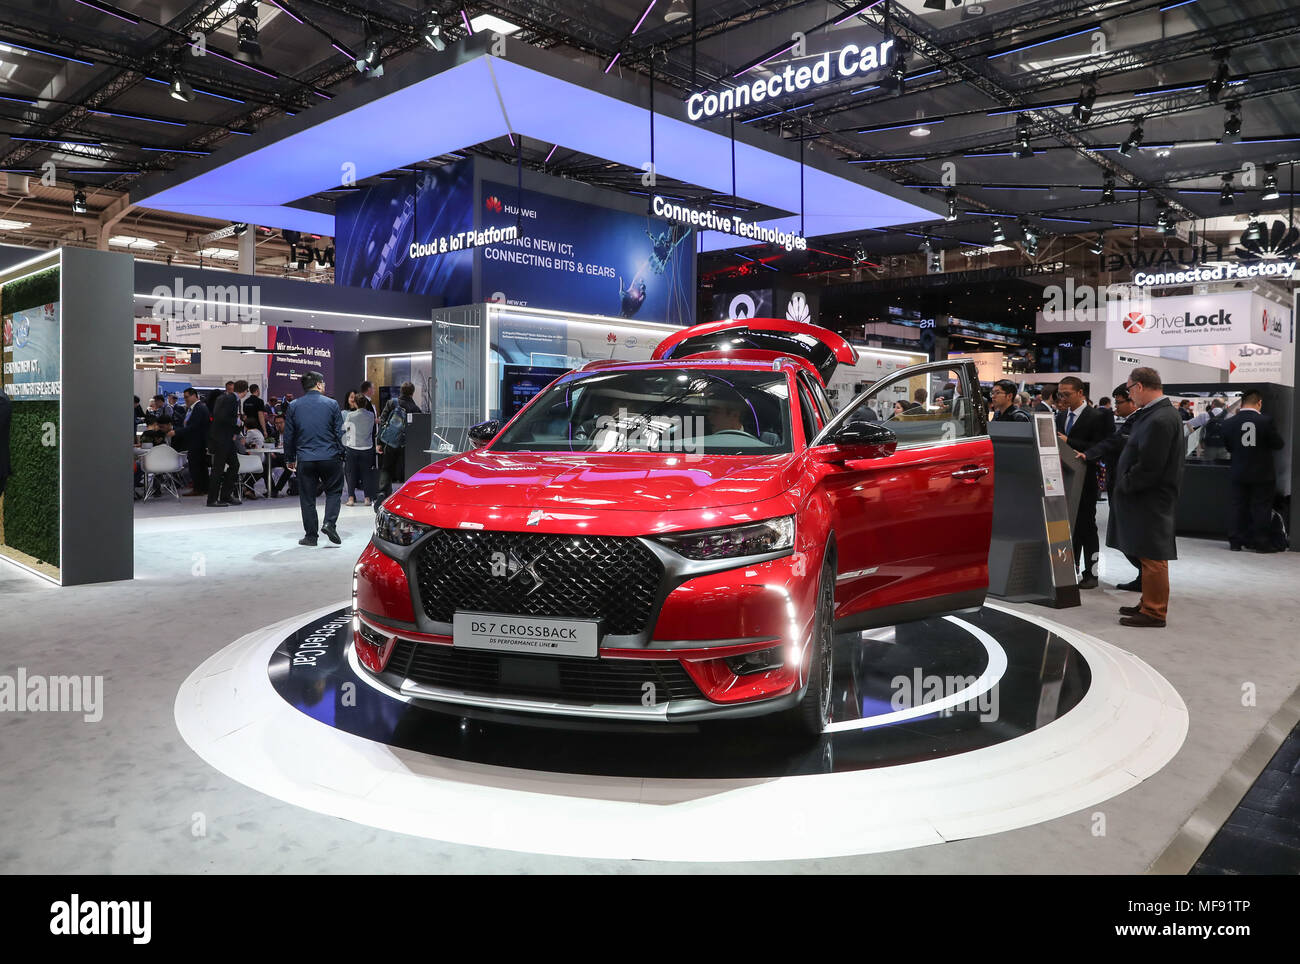 Hanover, Germany. 24th Apr, 2018. A DS 7 Crossback vehicle of Groupe PSA, using 'Connected Vehicle Modula Platform' and equipped with Huawei technology for new connected services, is on display at the booth of Huawei at Hanover Fair 2018 in Hanover, Germany. Around 1,300 Chinese exhibitors participate in Hanover Fair this year. Credit: Shan Yuqi/Xinhua/Alamy Live News Stock Photo